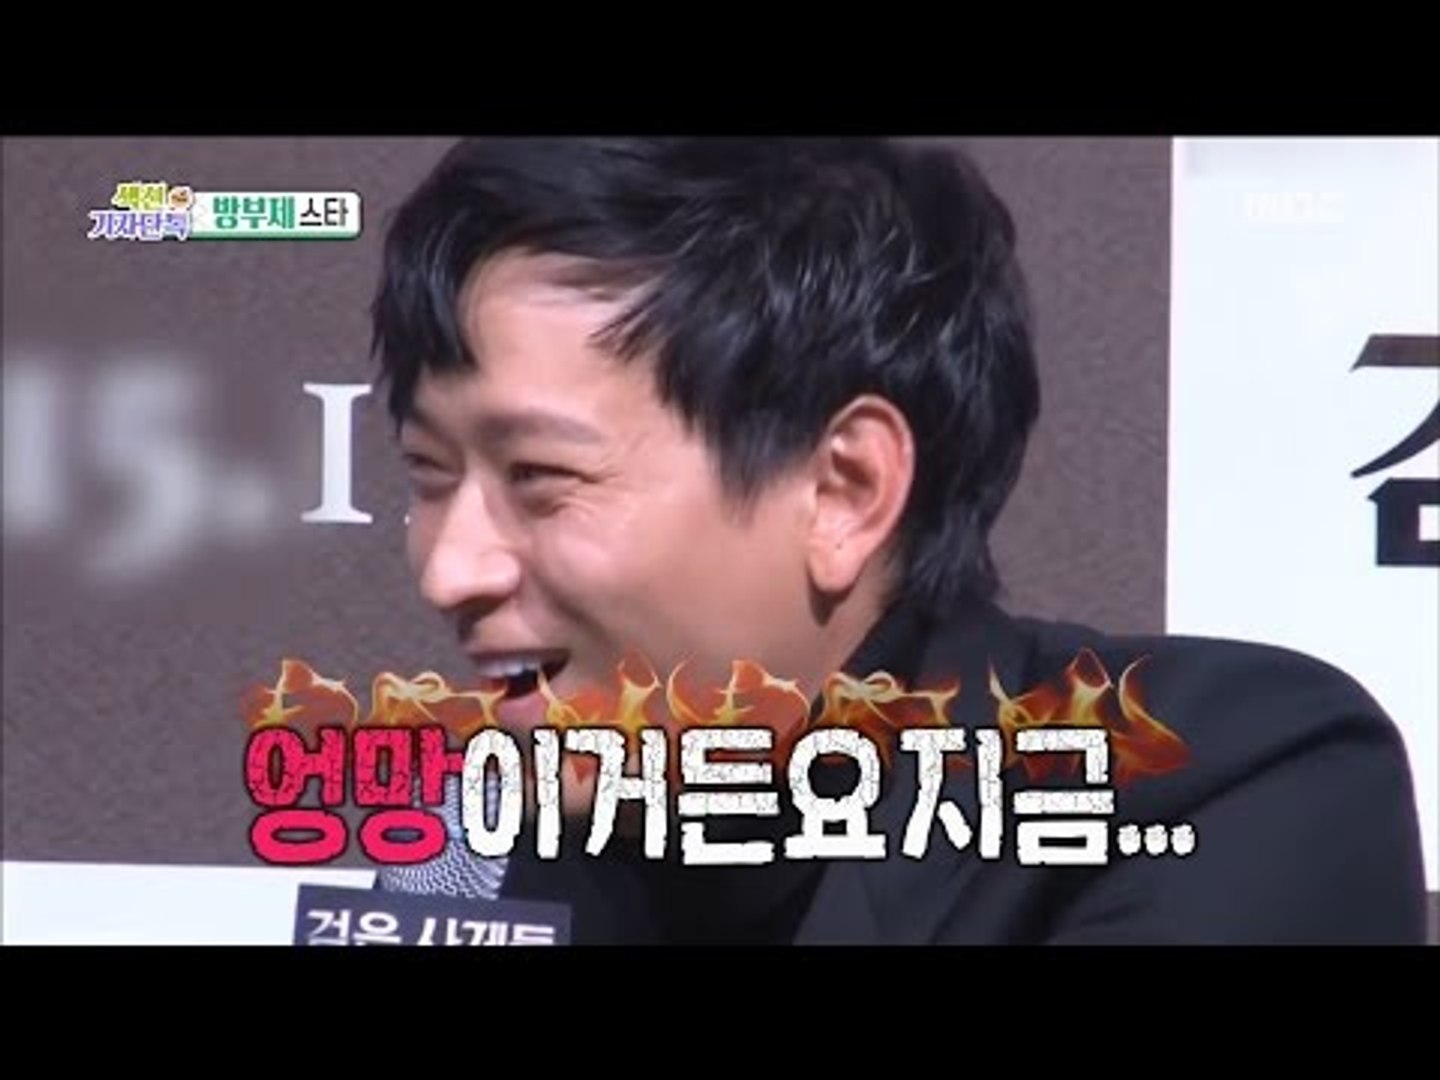 ⁣[Section TV] 섹션 TV - Kang Dong-won still looks young! 20160904